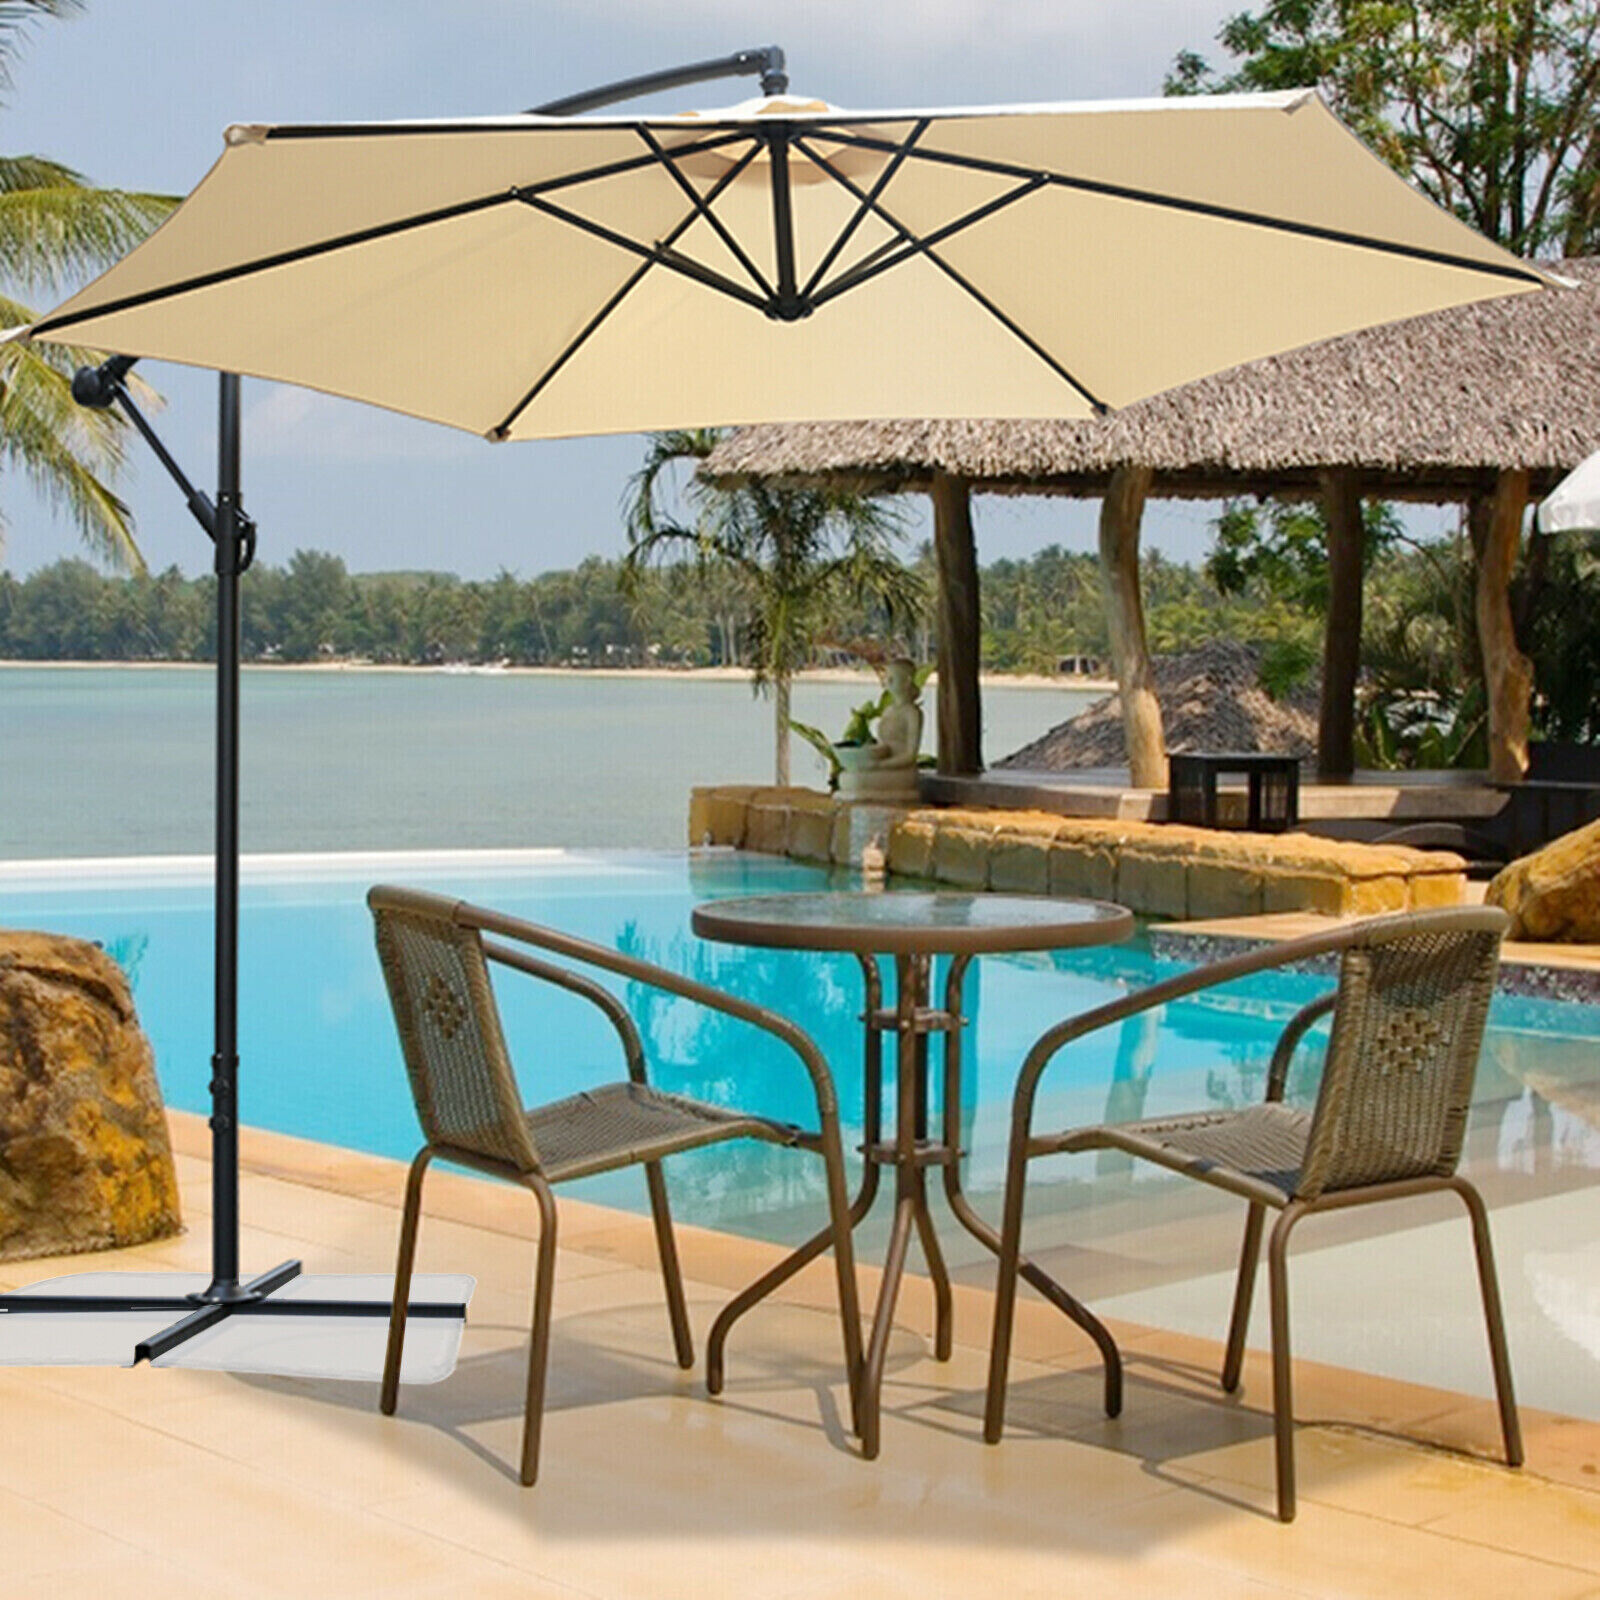 Primary image for 10Ft Patio Offset Umbrella Beach Yard Market Cantilever Hanging Sun Shade Crank